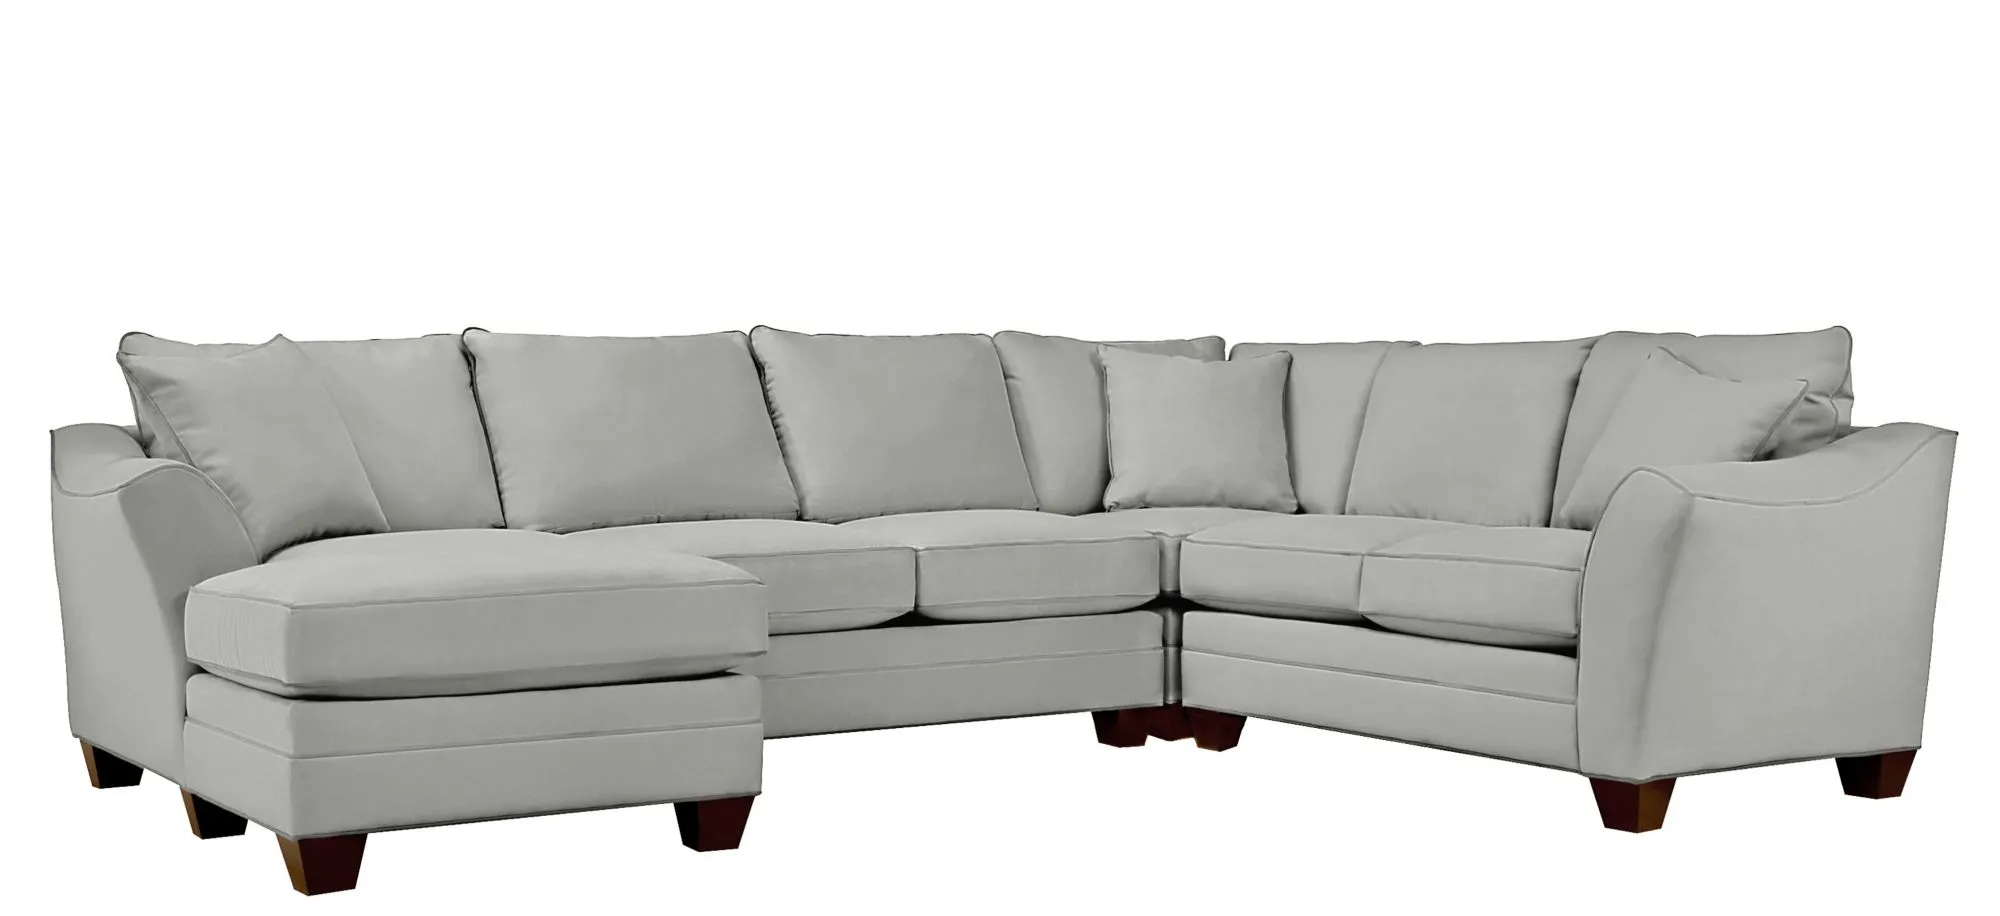 Foresthill 4-pc. Left Hand Chaise Sectional Sofa in Suede So Soft Platinum by H.M. Richards